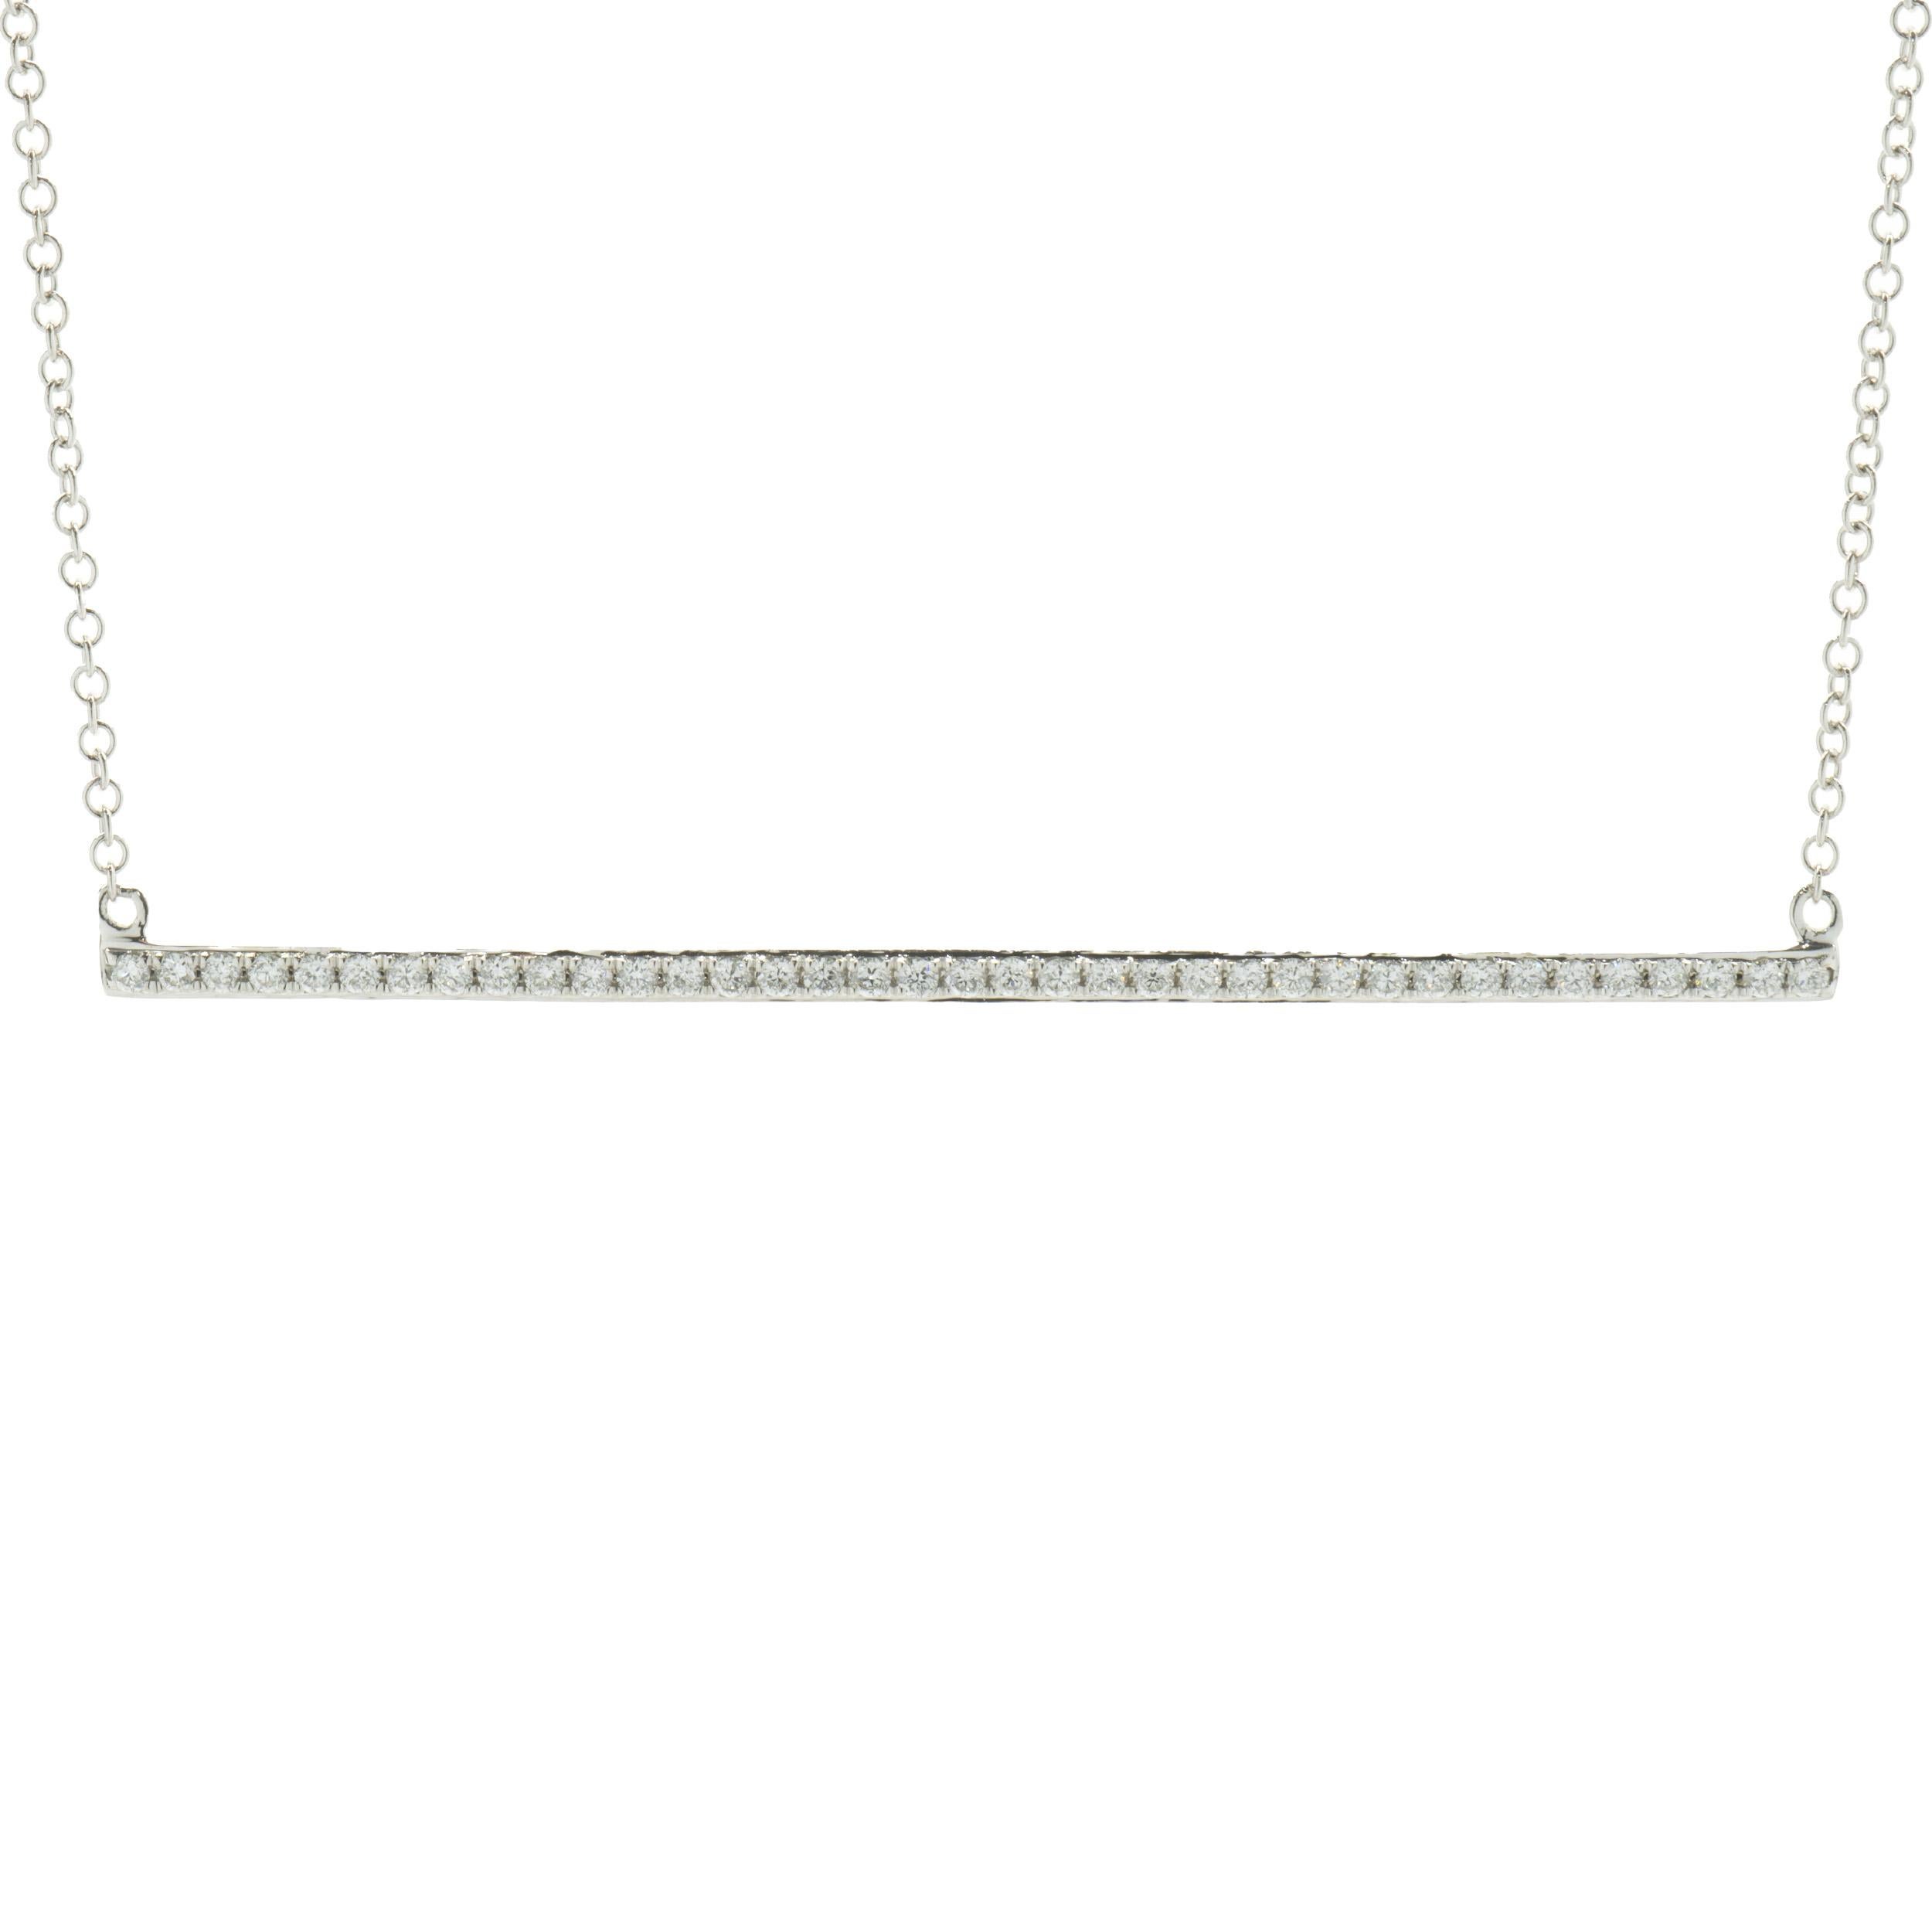 Designer: custom
Material: 14K white gold
Diamonds: 37 round brilliant cut = 0.28cttw
Color: G
Clarity: VS1-2
Weight: 2.10 grams
Dimensions: necklace measures 16-inches long